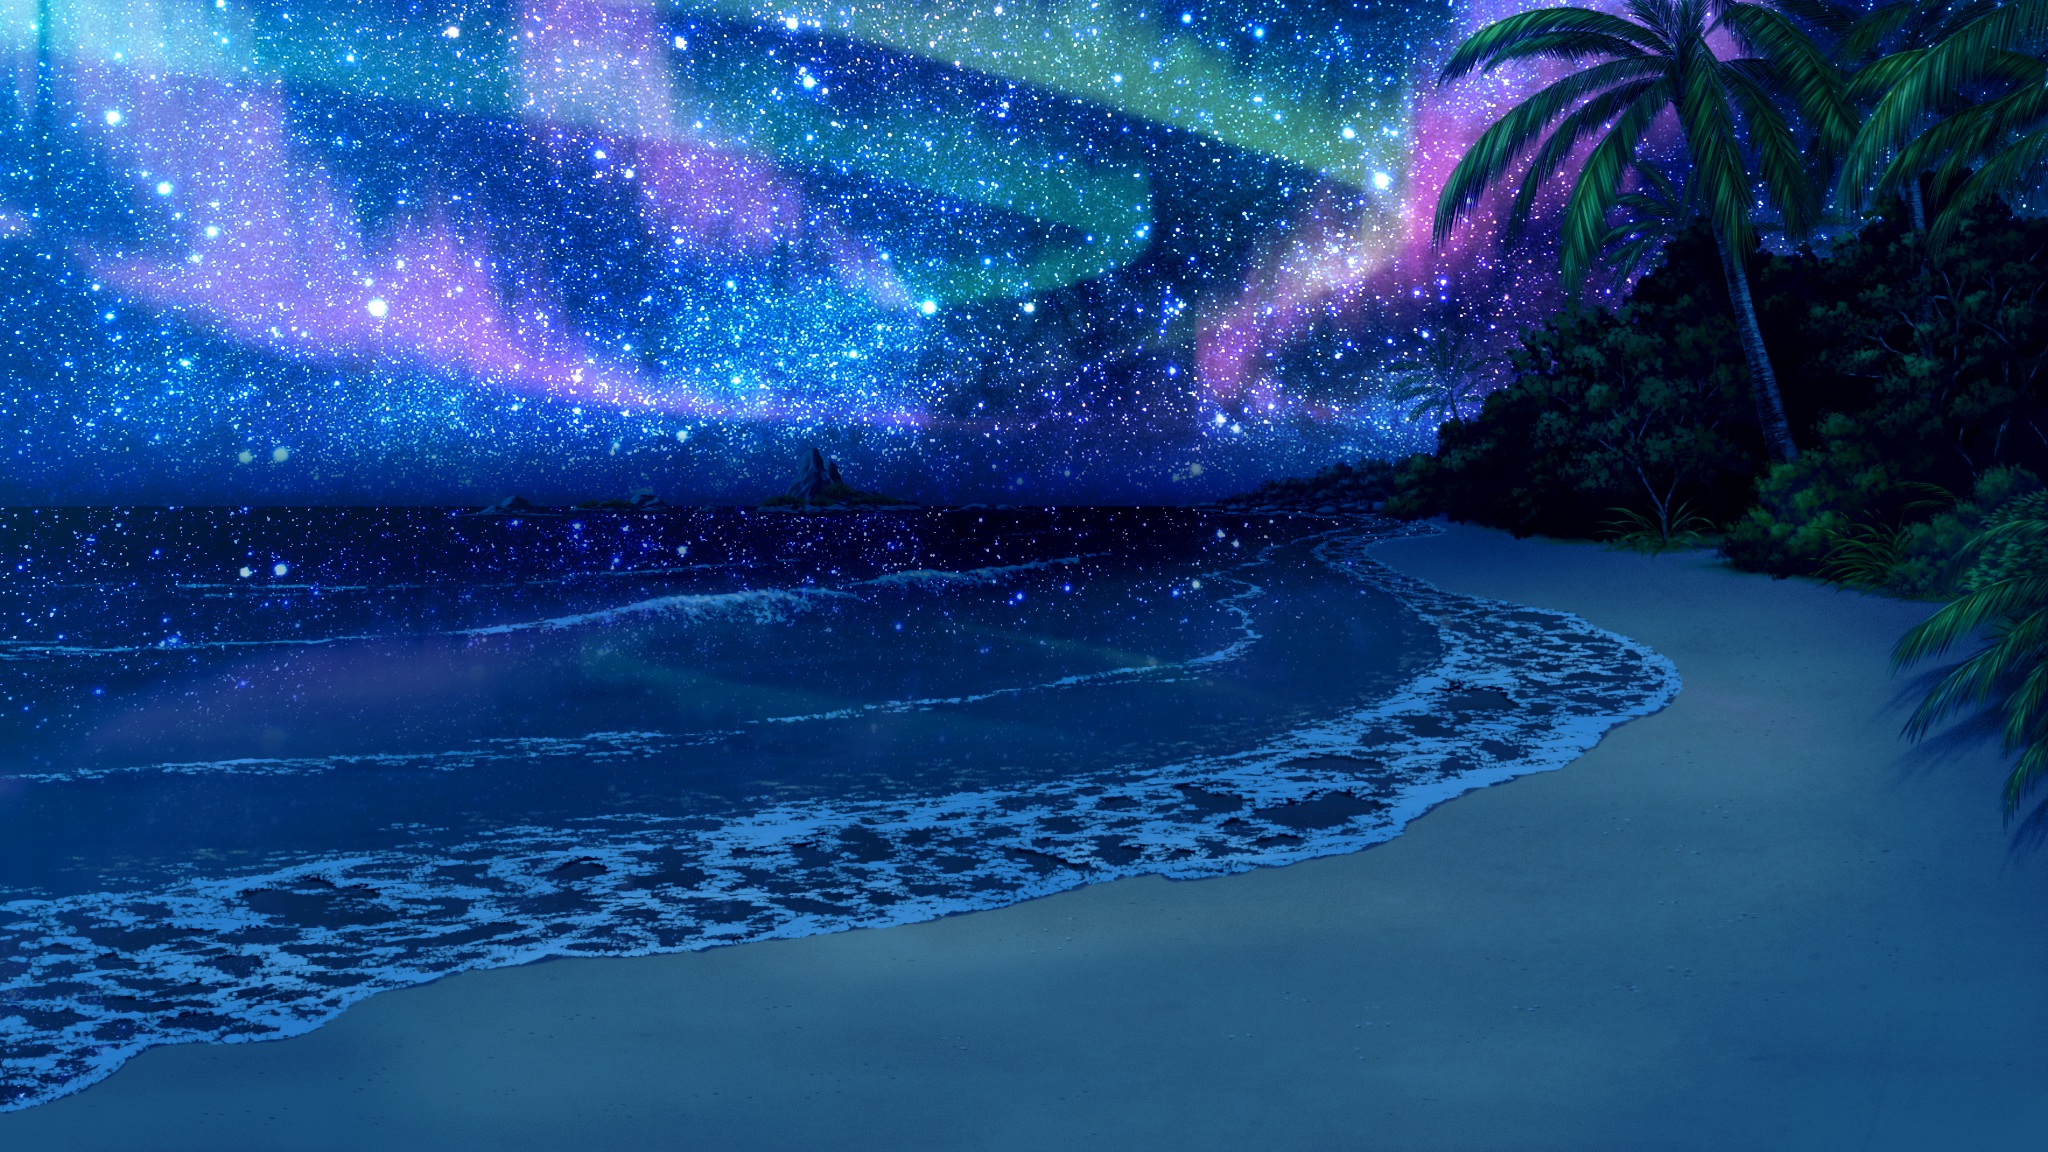 Free Download Beach At Night Backgrounds 